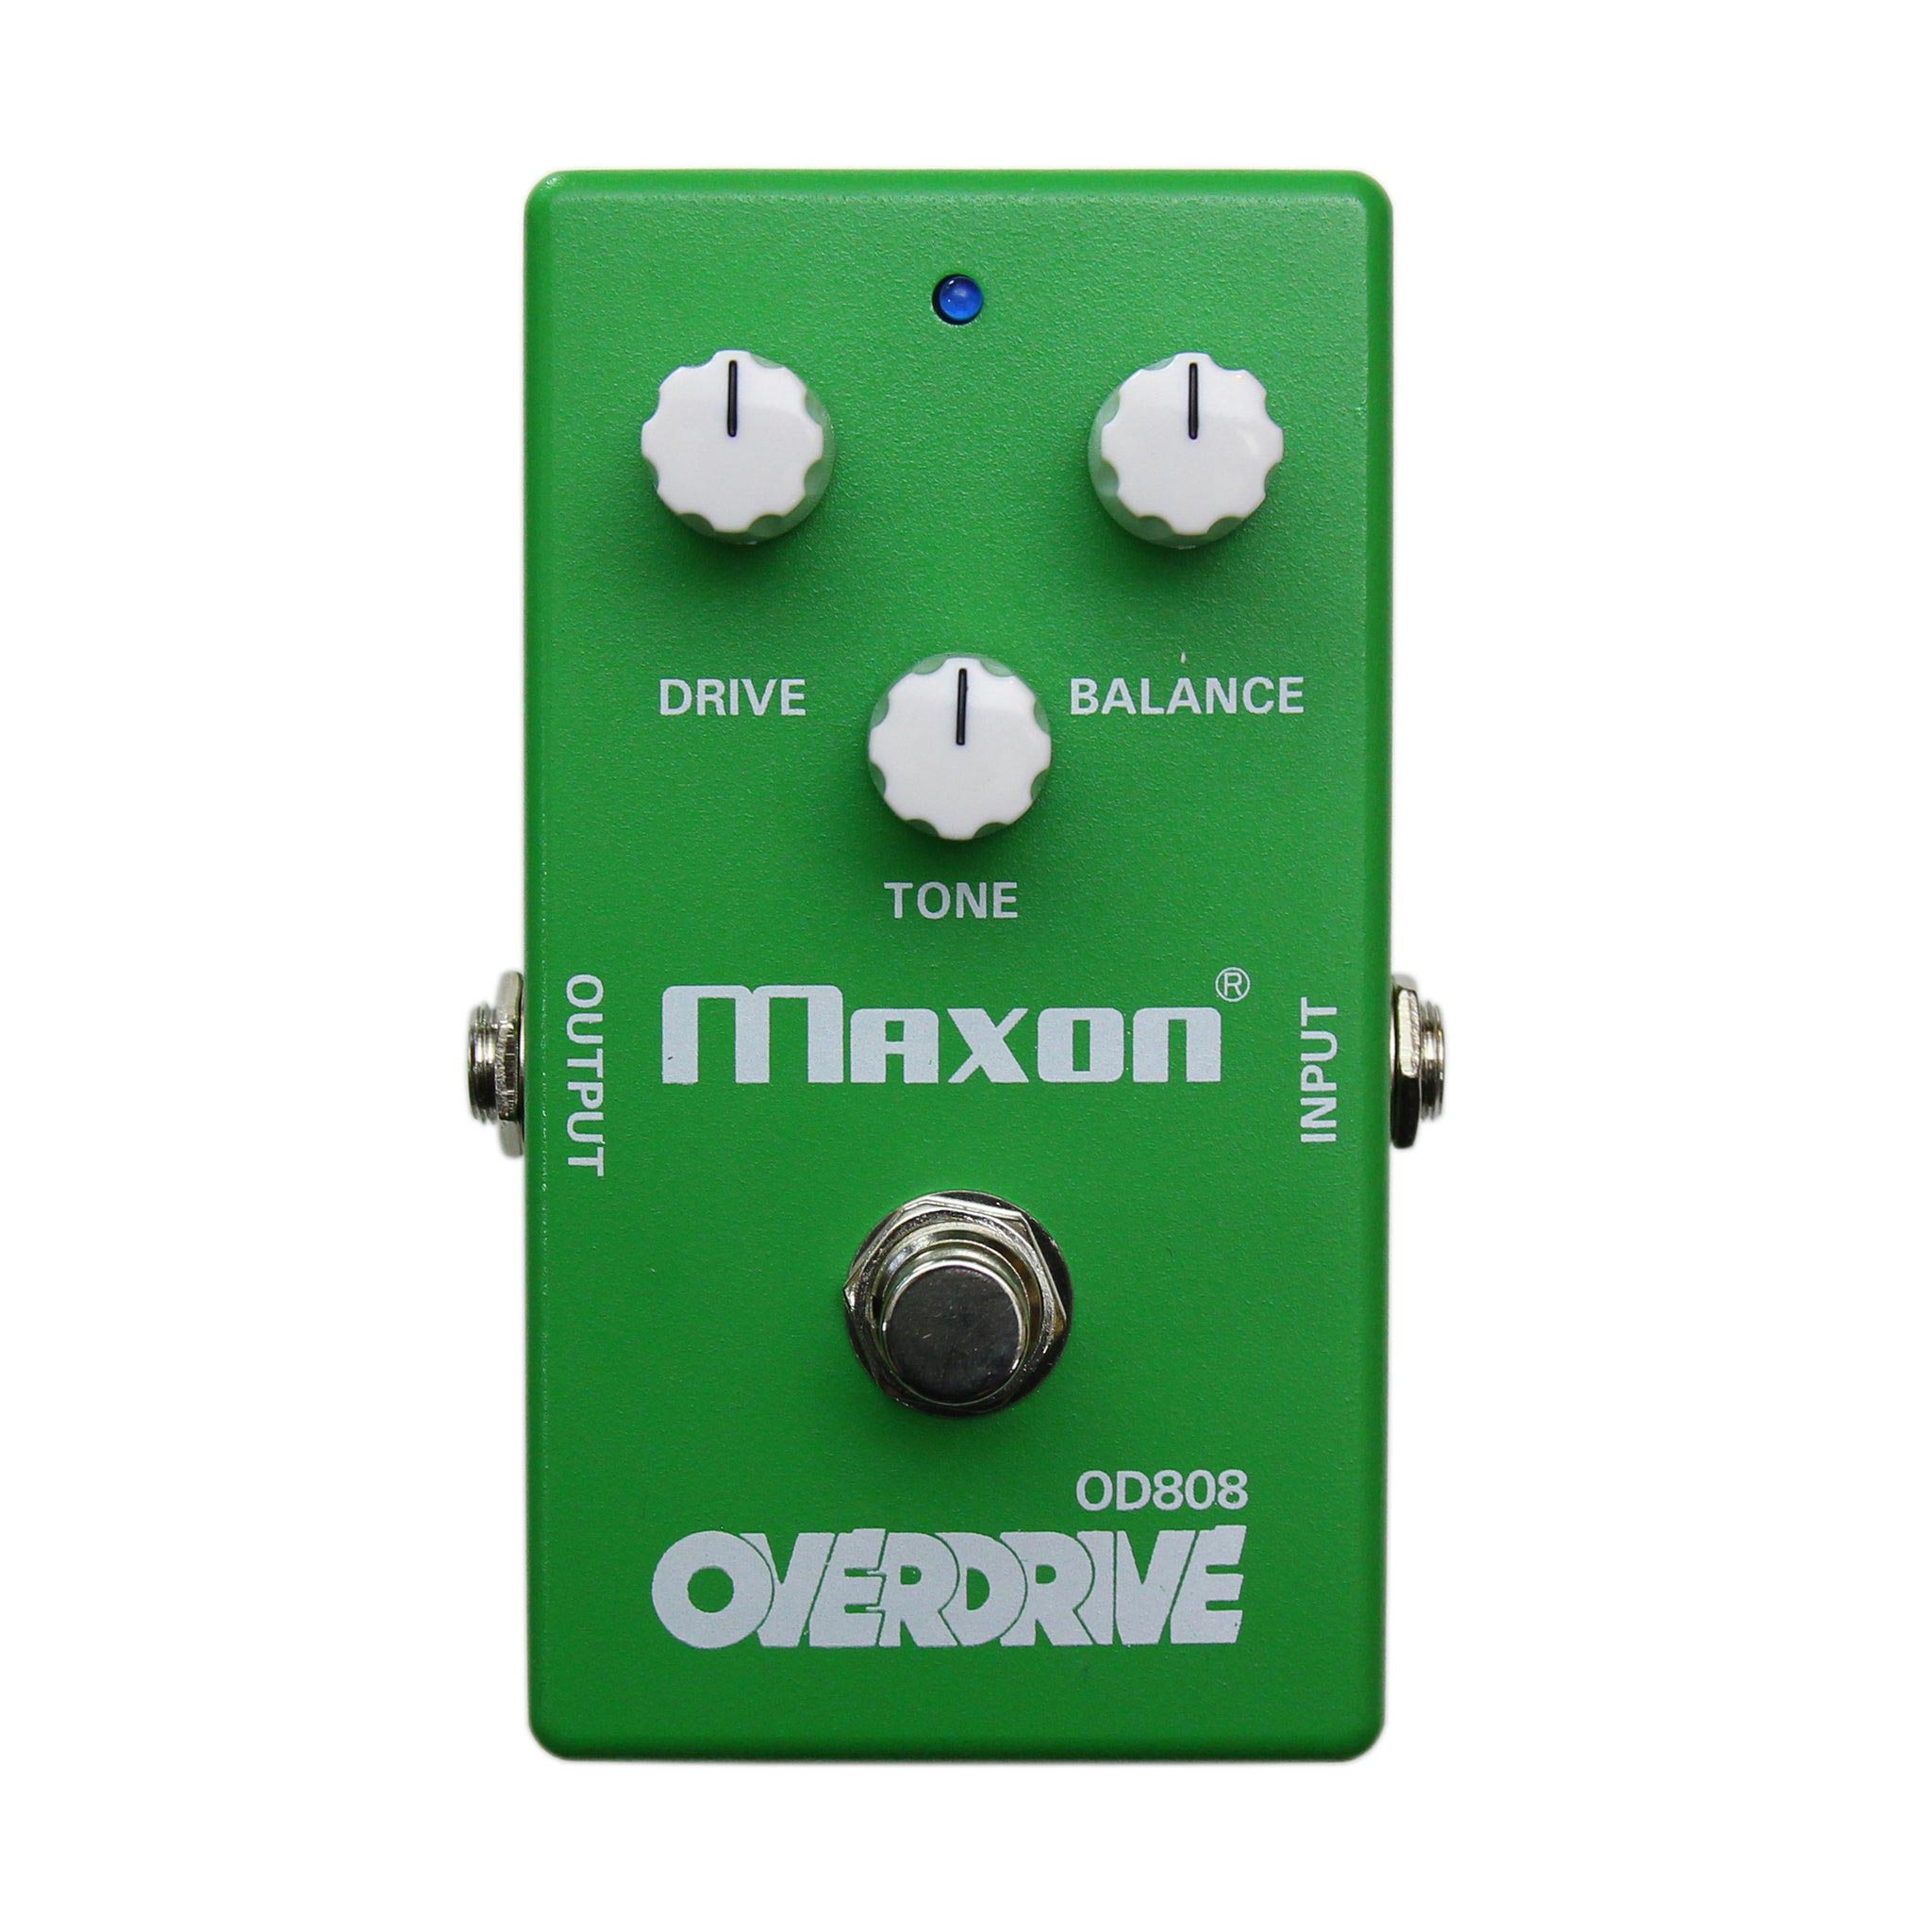 Maxon Limited Edition 40th Anniversary OD808 Overdrive Models